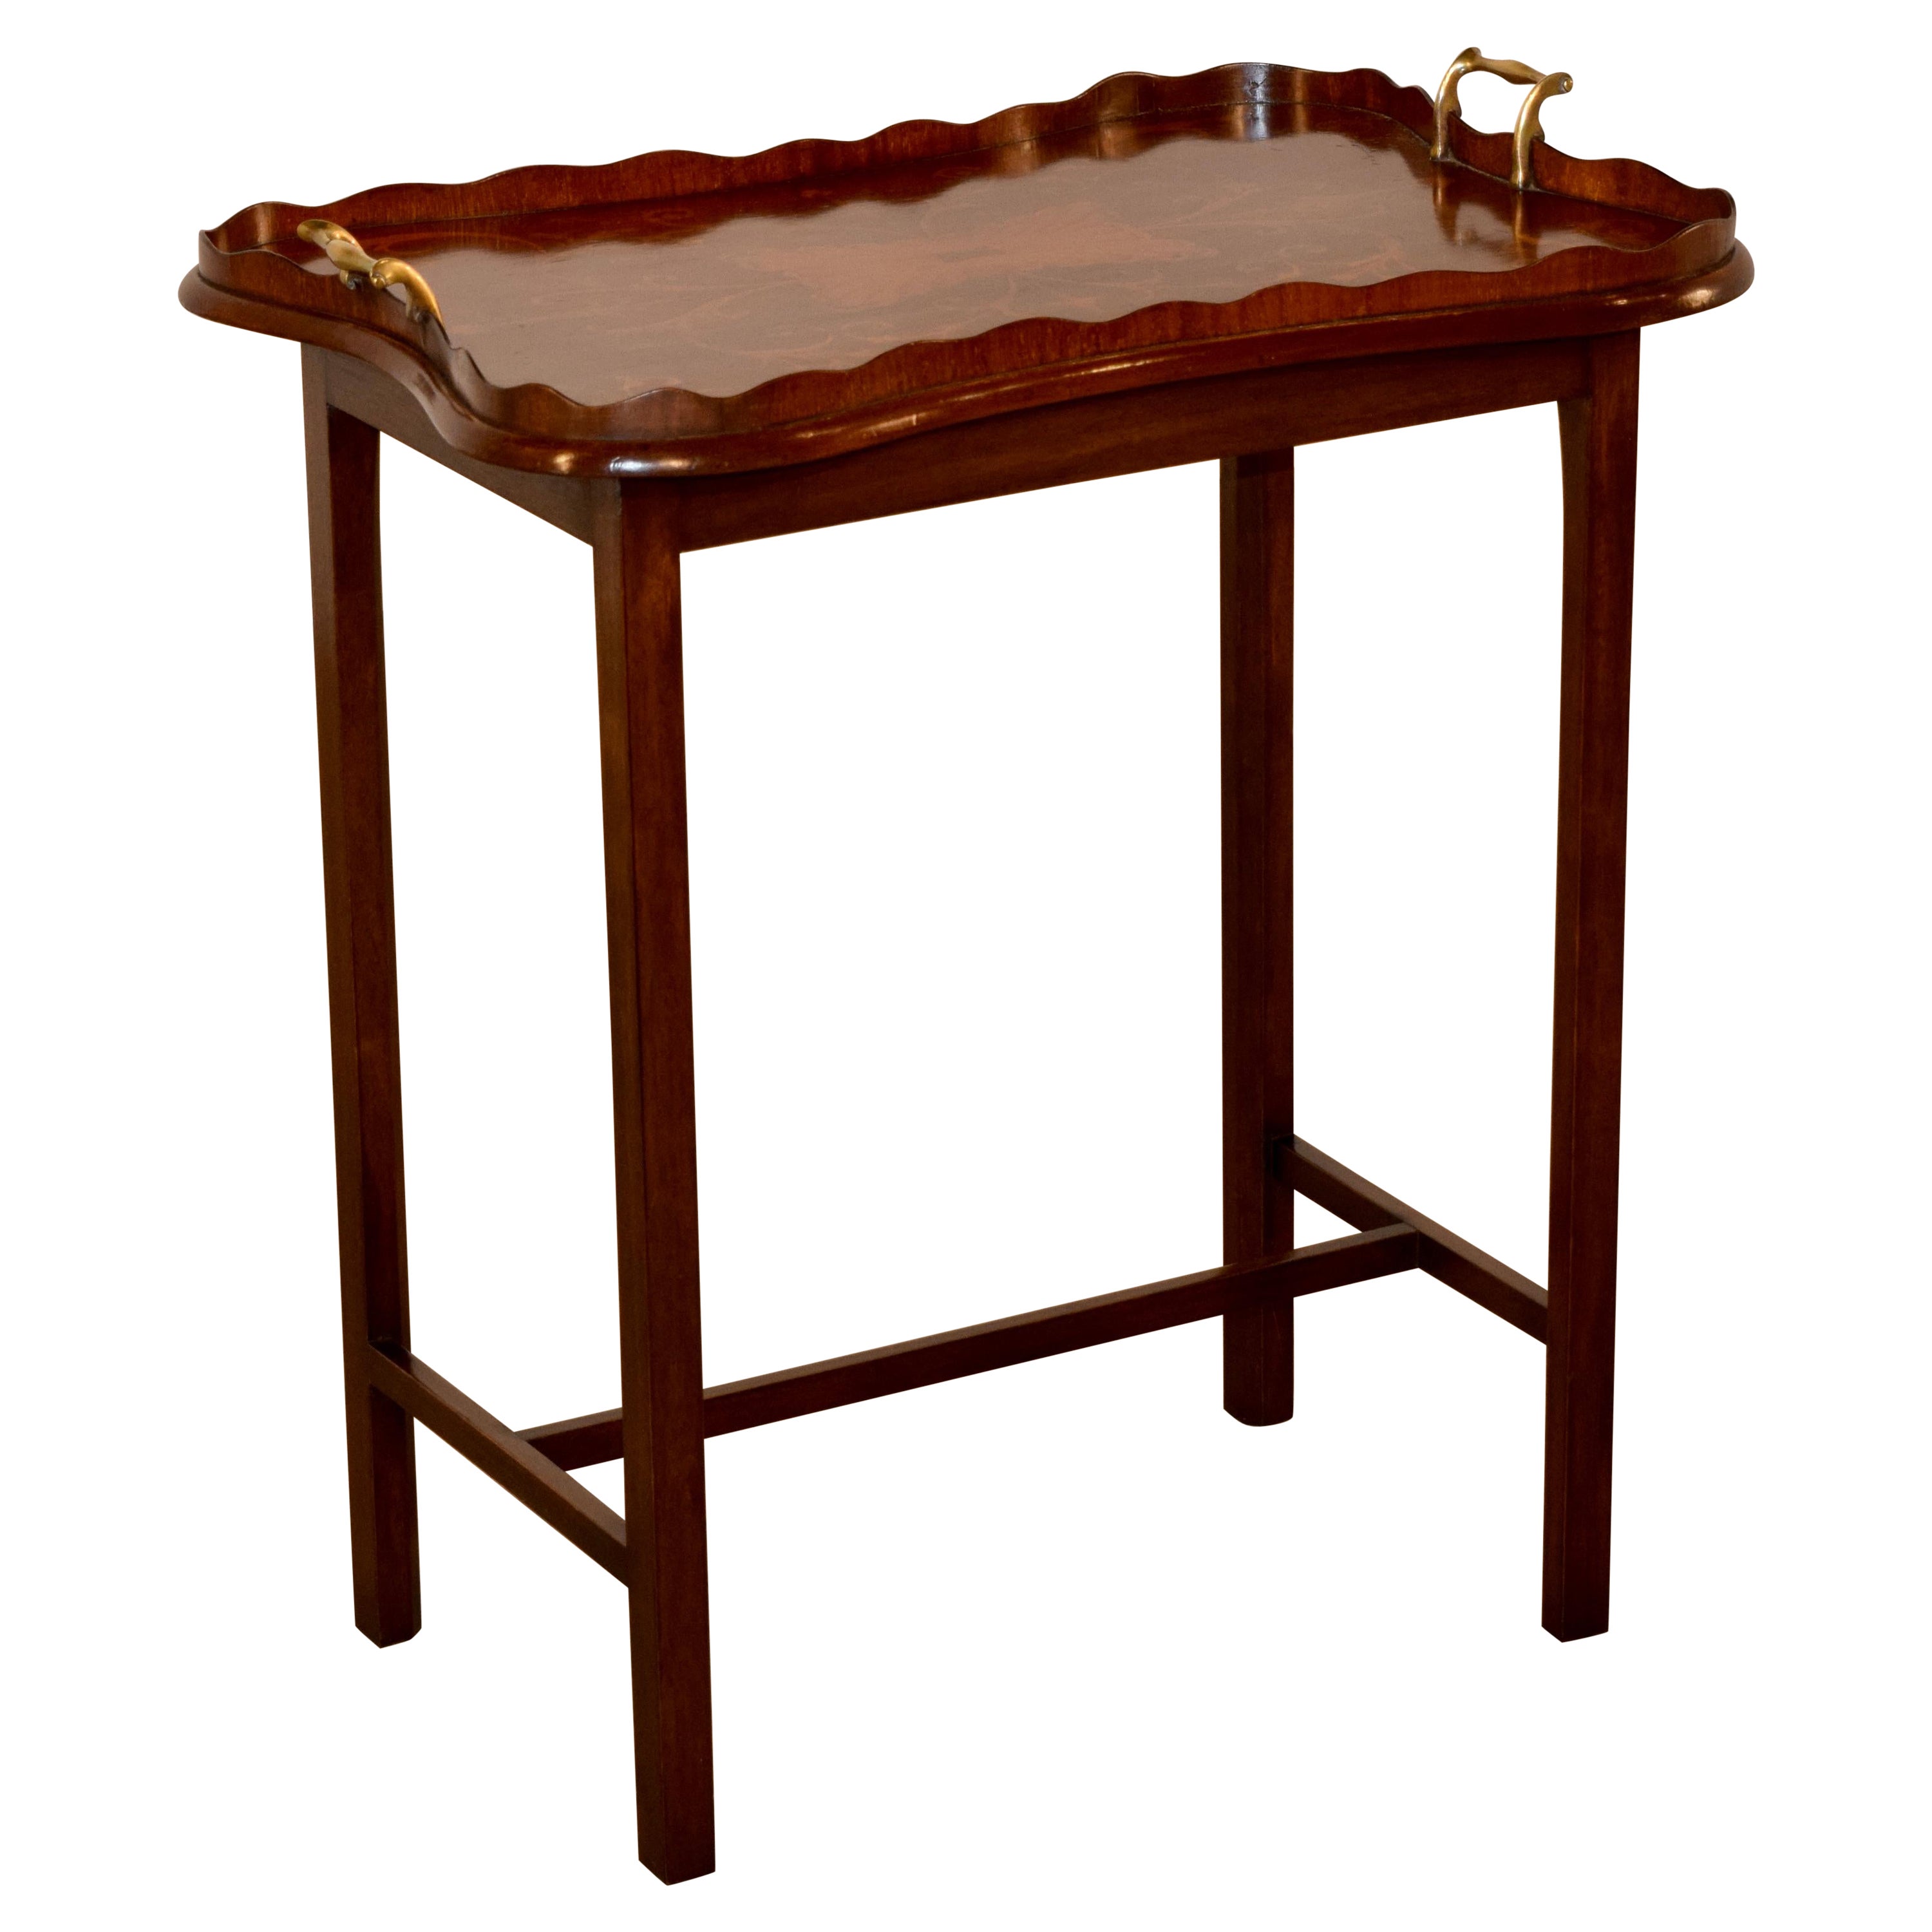 19th Century English Mahogany Inlaid Serving Tray on Stand